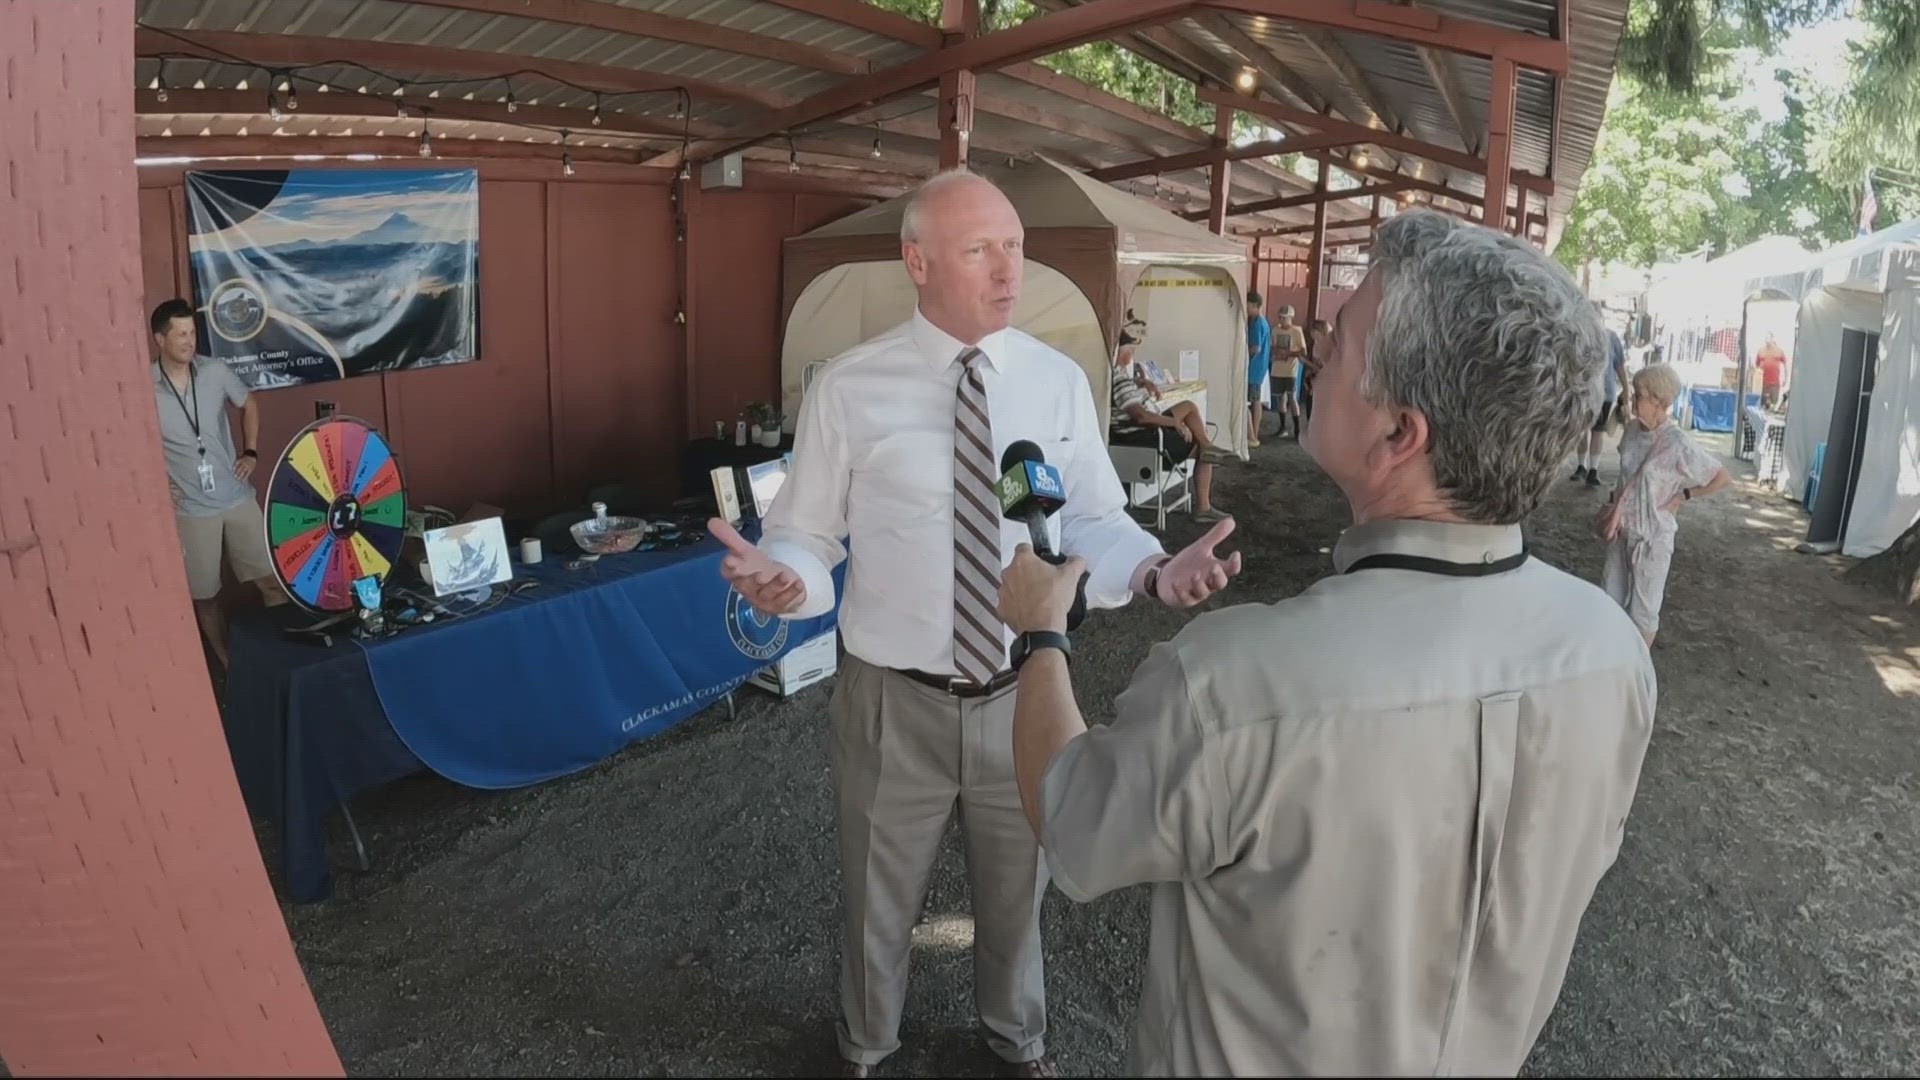 DA John Wentworth is at the county fair handing out the blue Deterra pouches. They are designed to destroy potentially dangerous drugs.